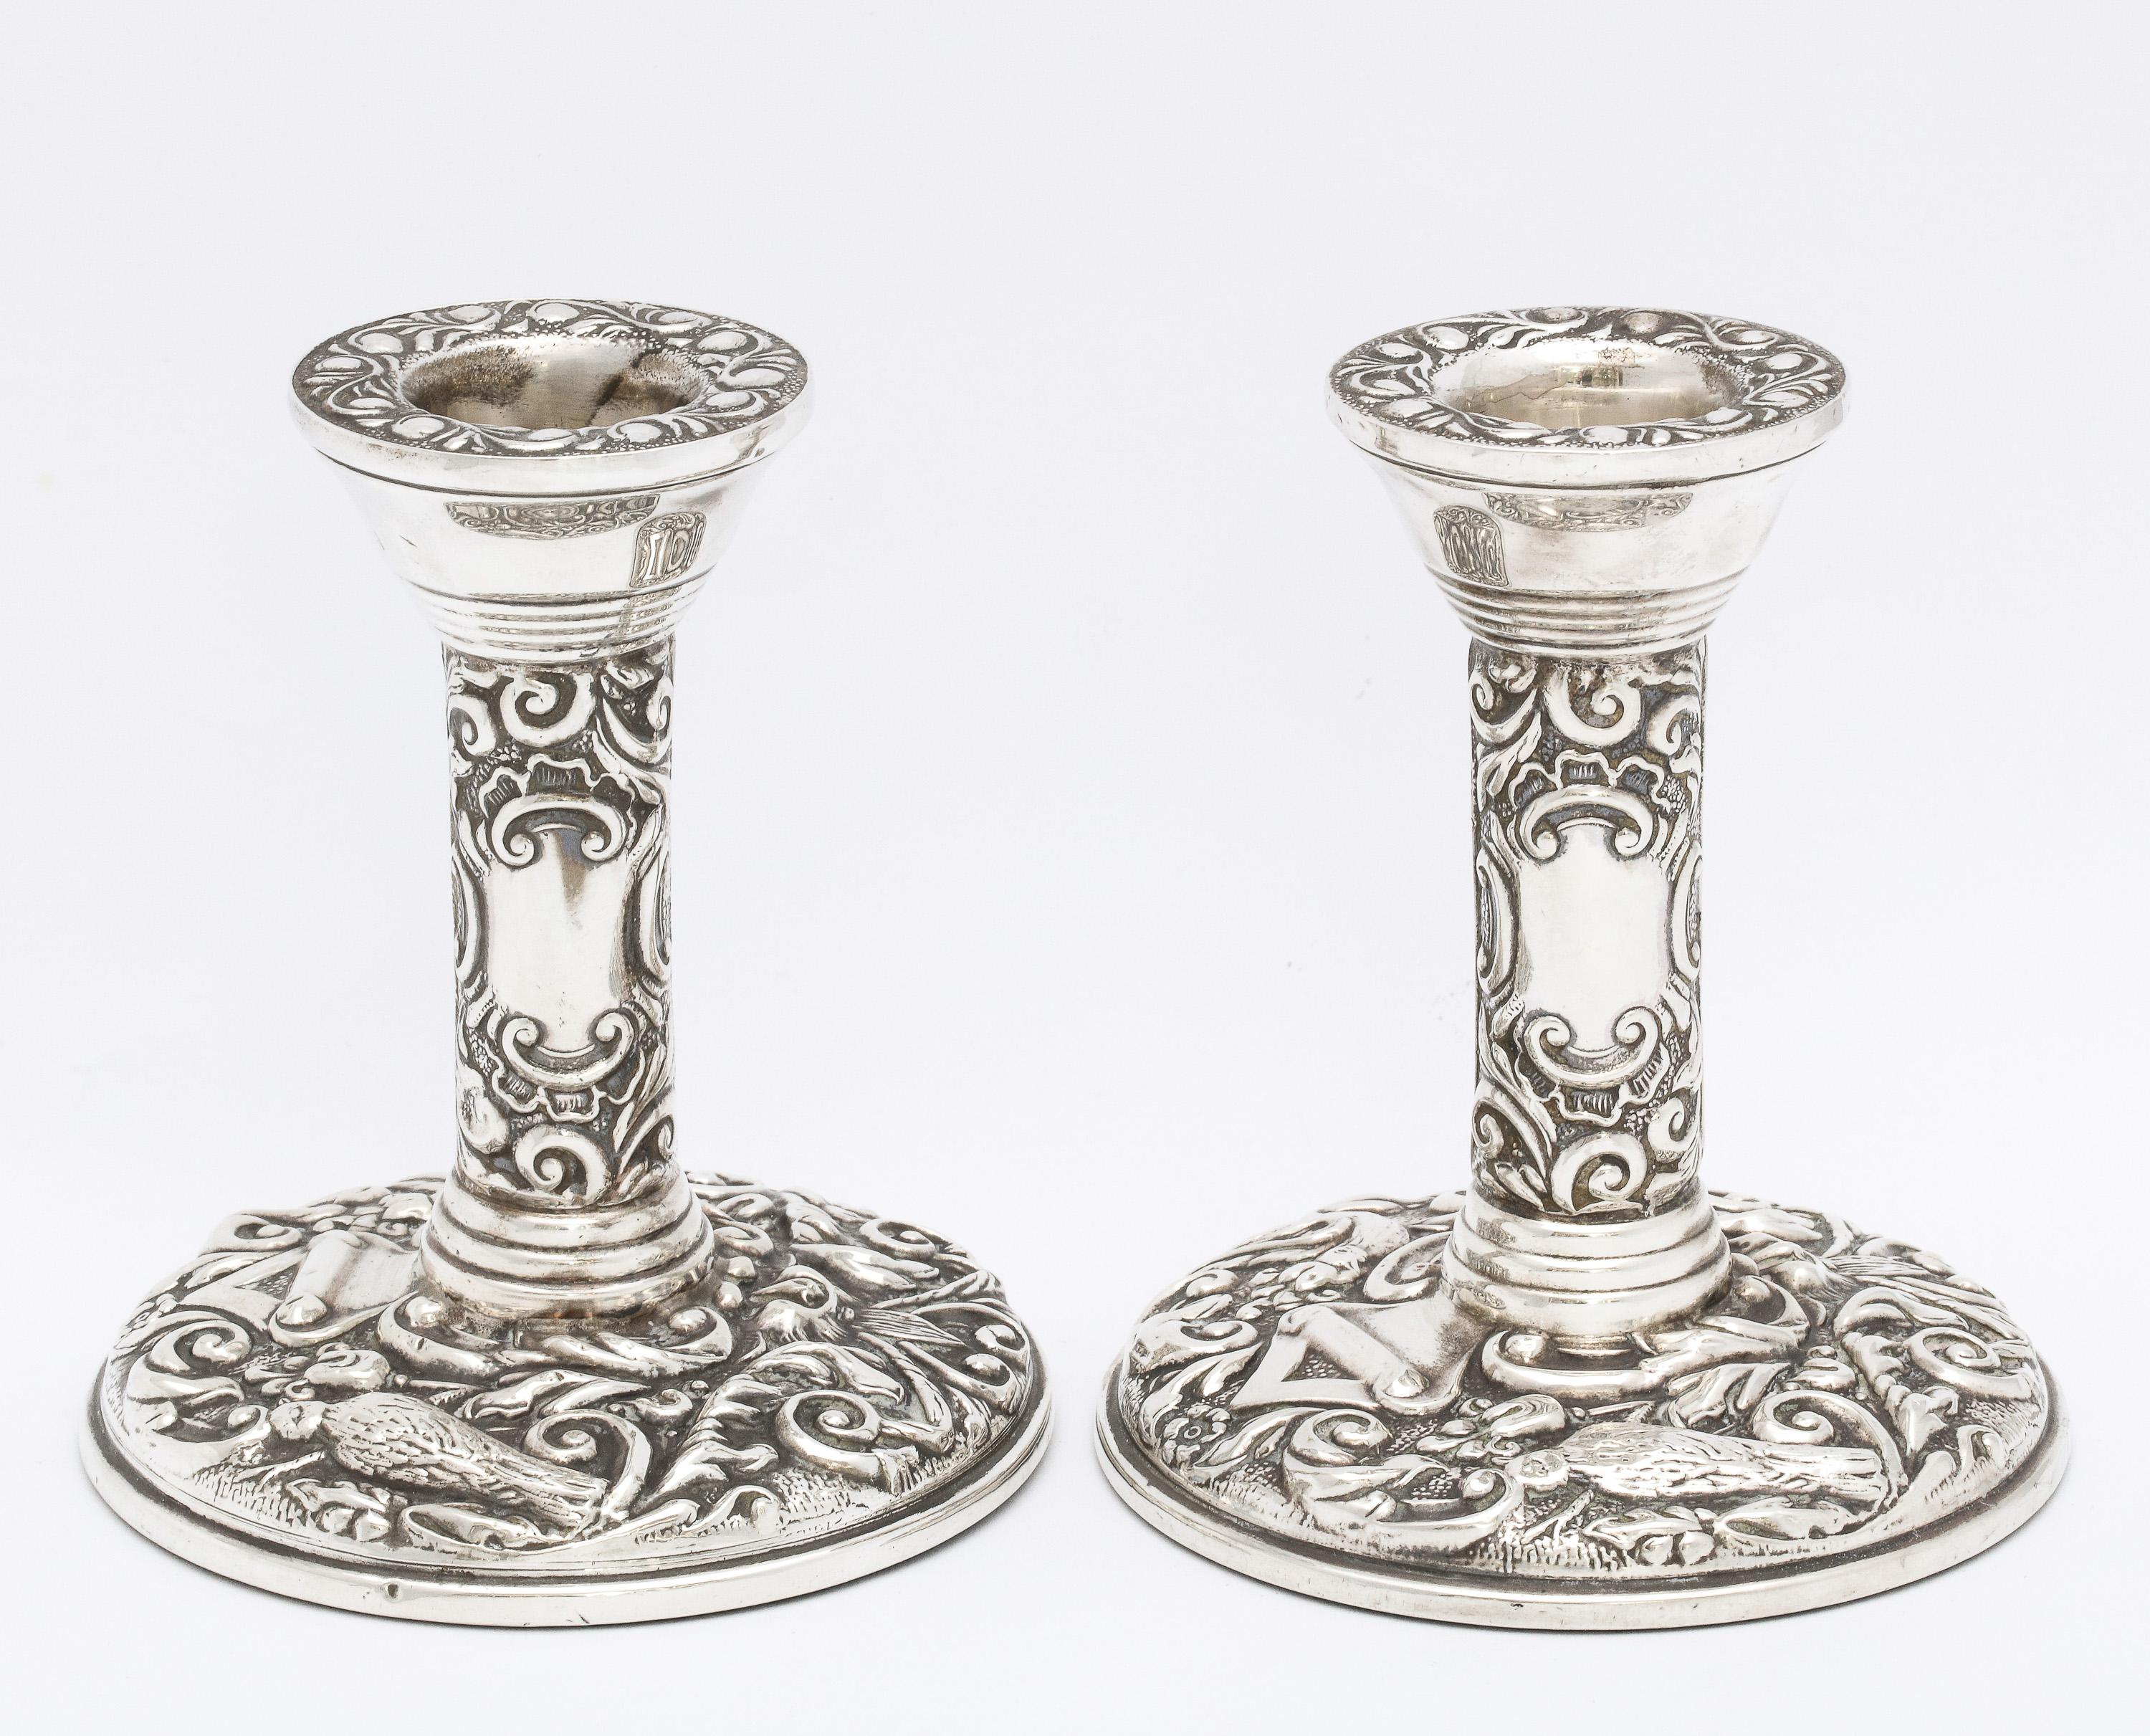 Pair of Victorian style, sterling silver candlesticks, Birmingham, England, Broadway and Company, year-hallmarked for 1977 for Queen Elizabeth II 's Jubilee. Designed with birds, swirls, etc. Each candlestick measures 4 inches high x 3 1/2 inches